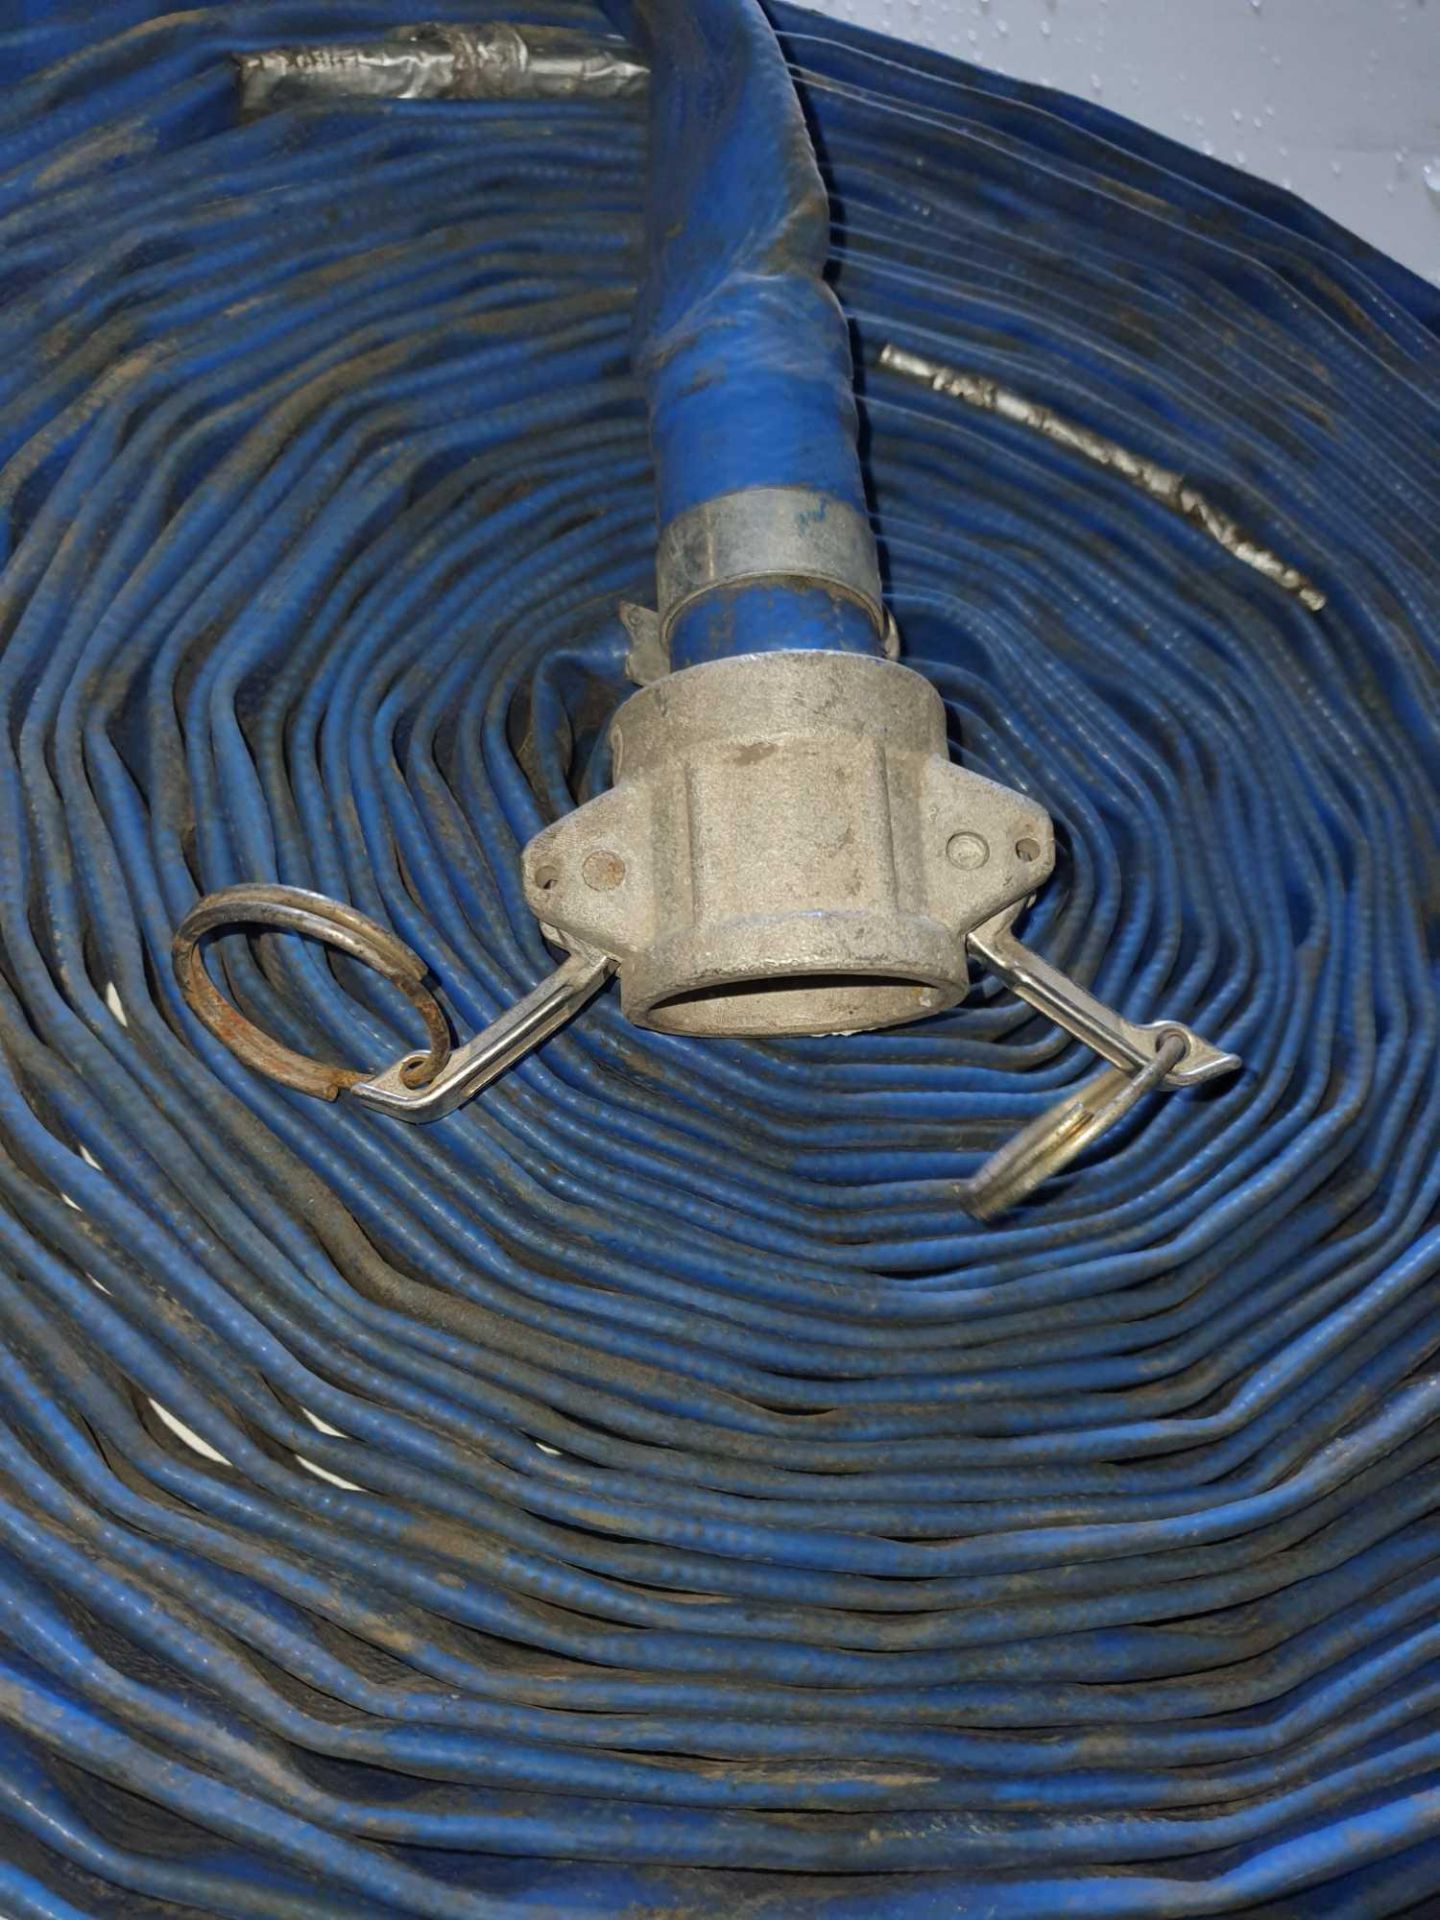 1" quick fit hose - Image 2 of 2